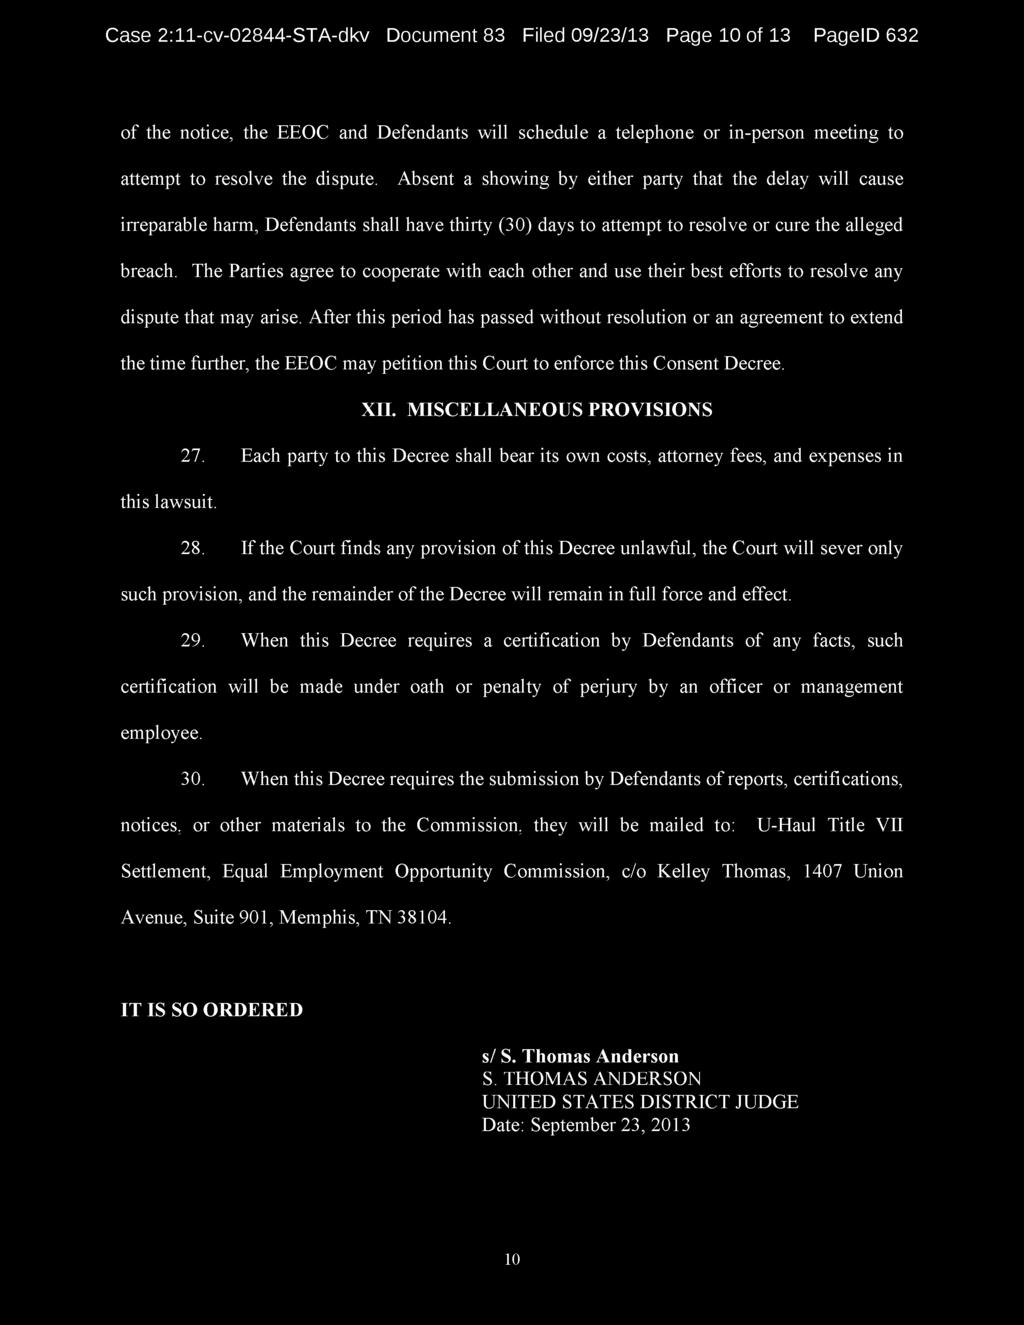 Case 2:11-cv-02844-STA-dkv Document 83 Filed 09/23/13 Page 10 of 13 PagelD 632 of the notice, the EEOC and Defendants will schedule a telephone or in-person meeting to attempt to resolve the dispute.